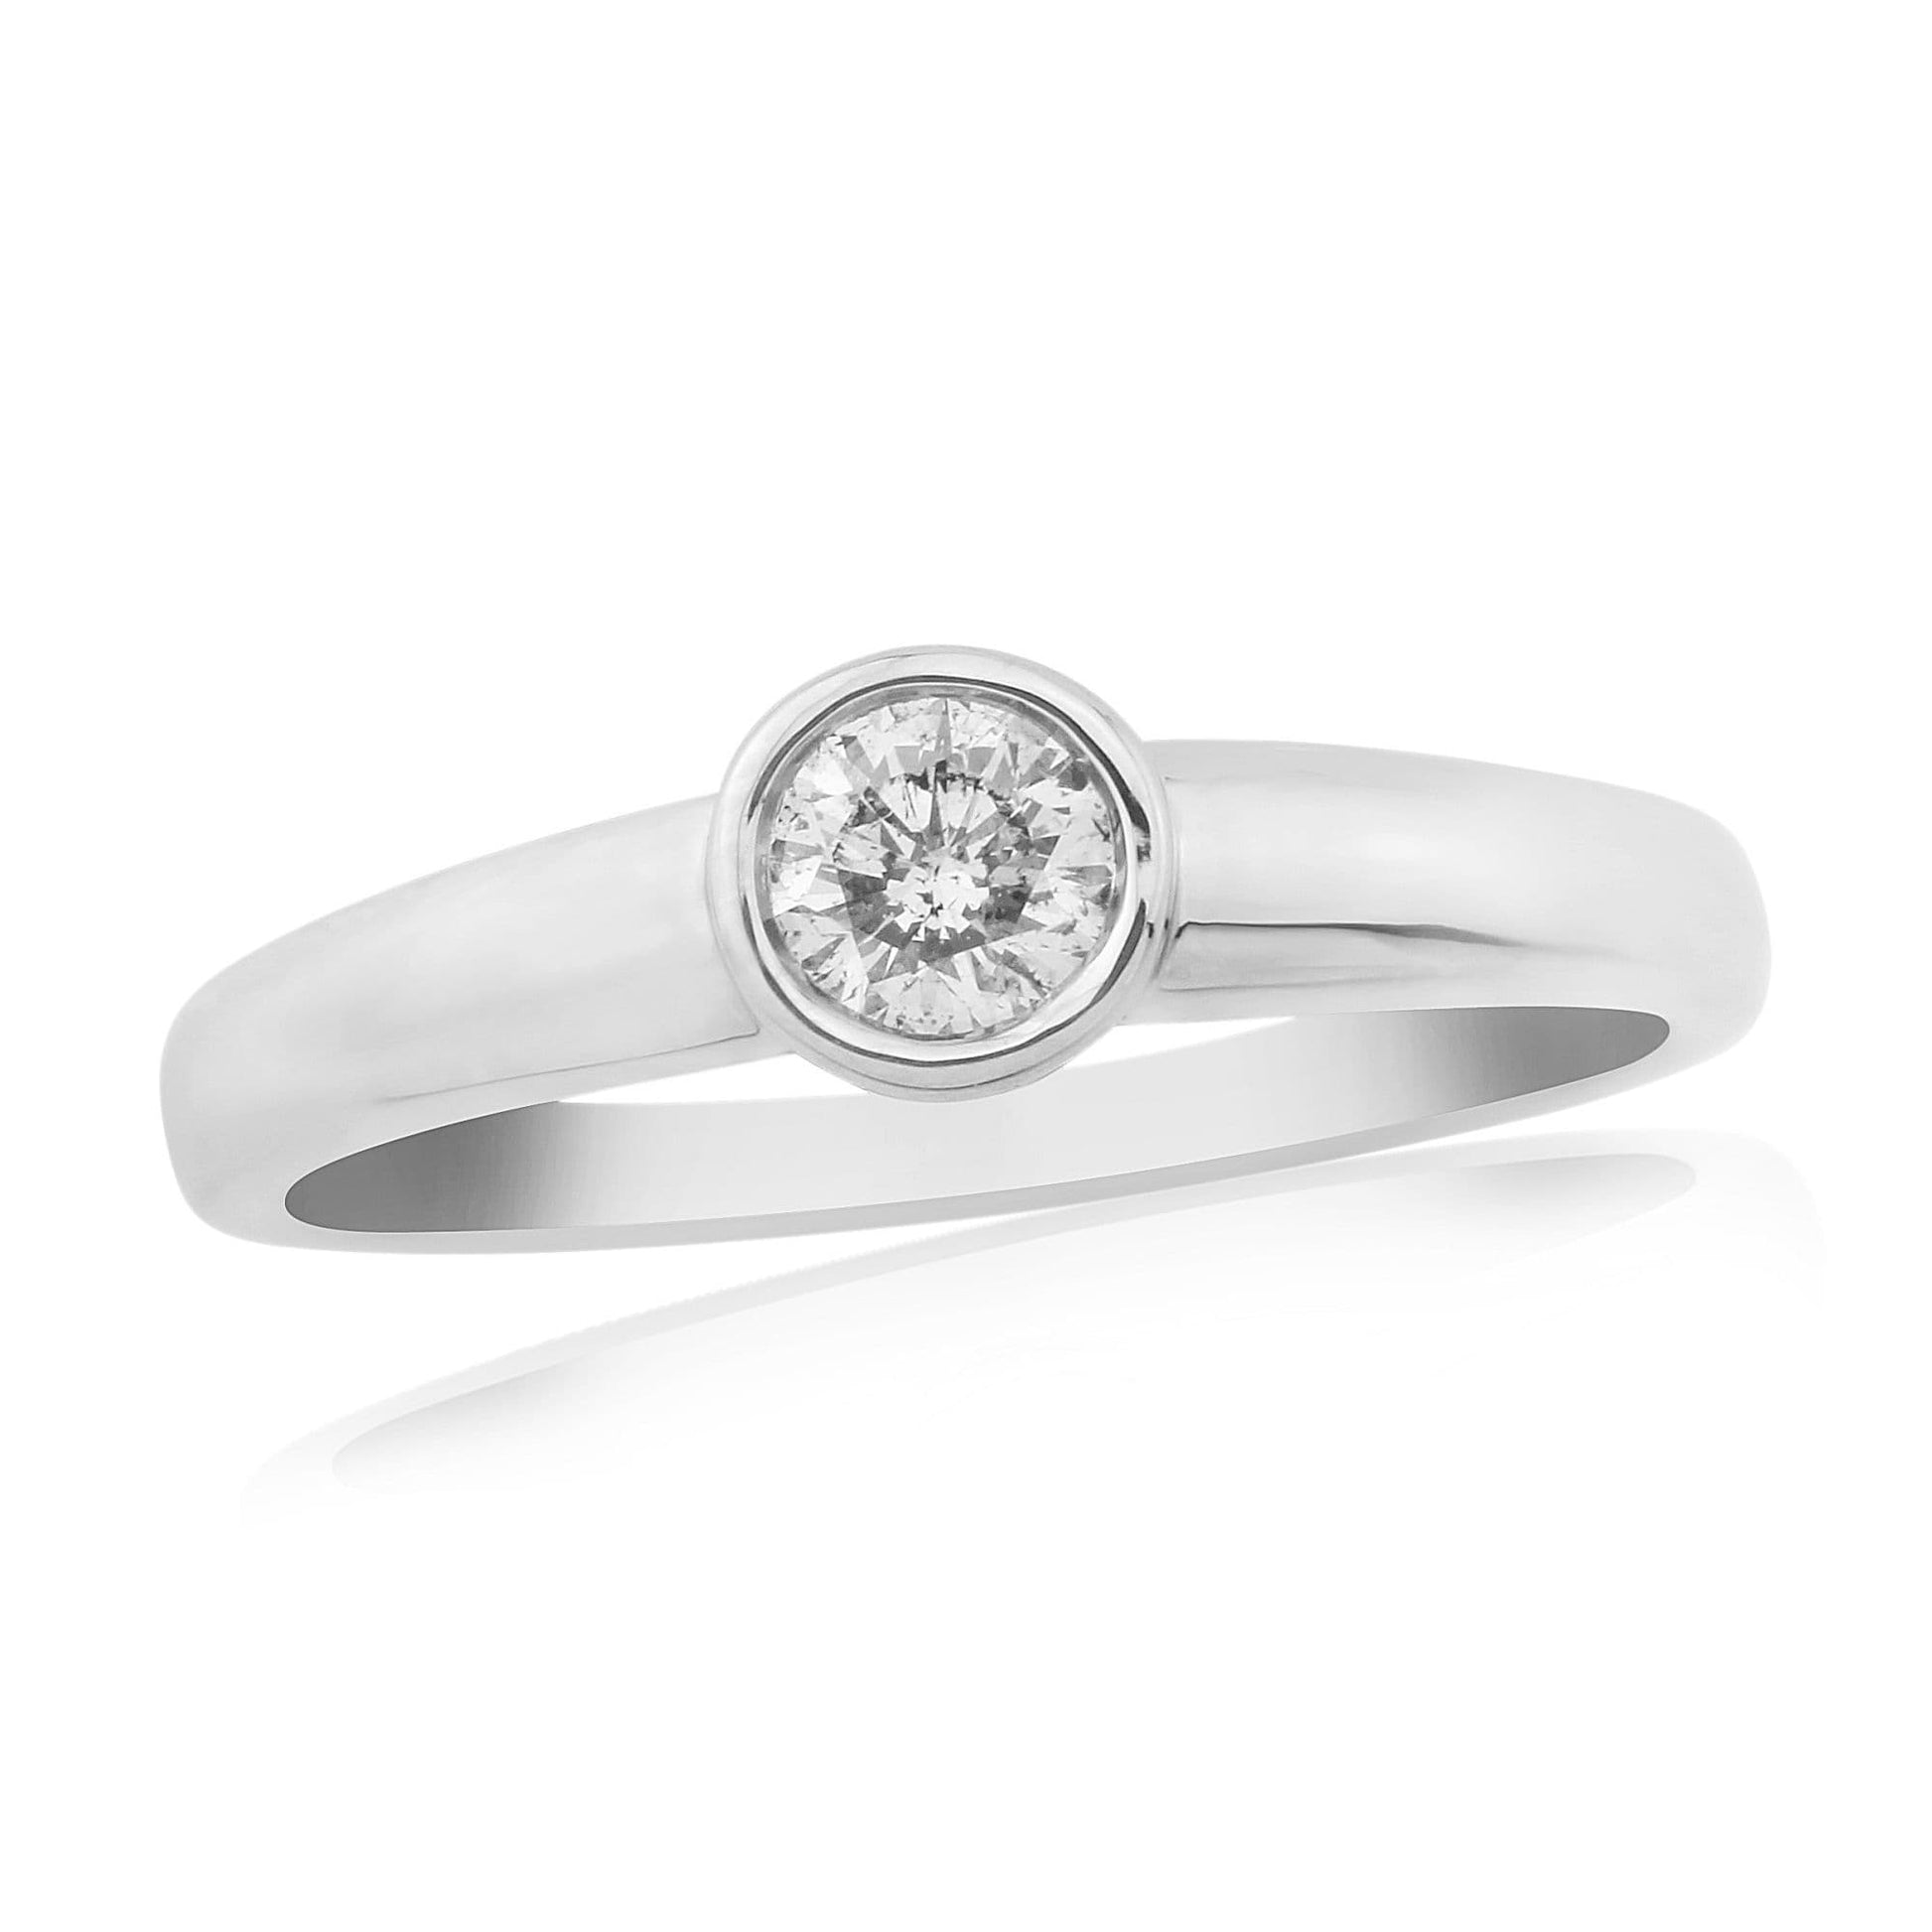 Engagement ring quarter carat diamond rubbed over solitaire single stone white gold 25 points